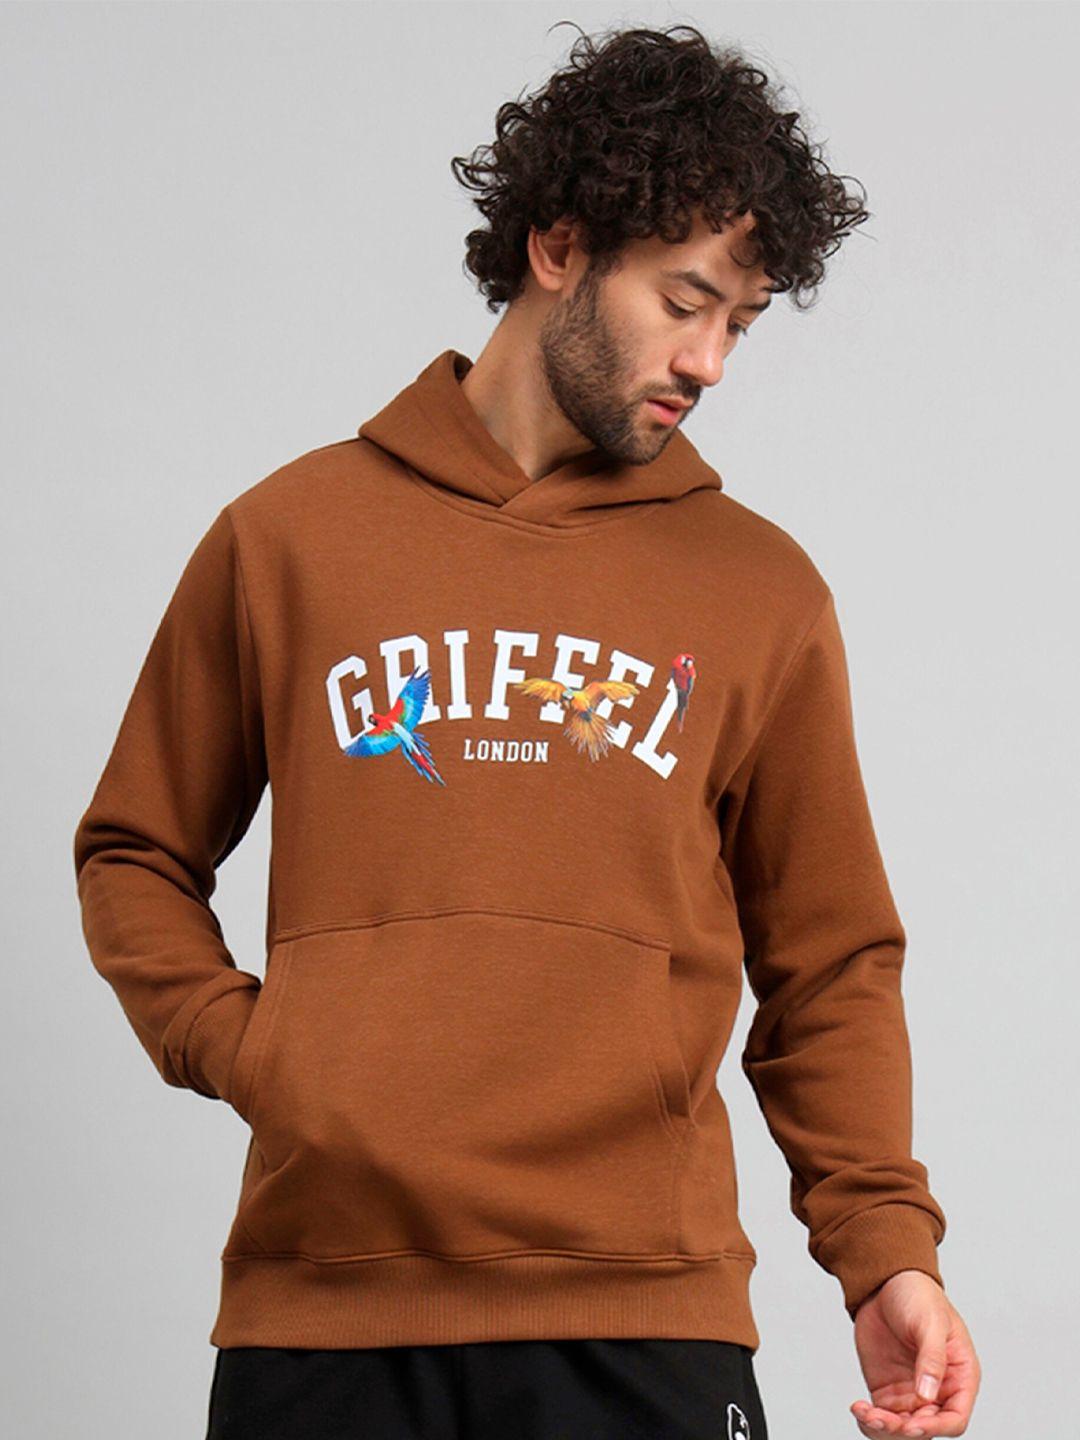 griffel typography printed hooded fleece pullover